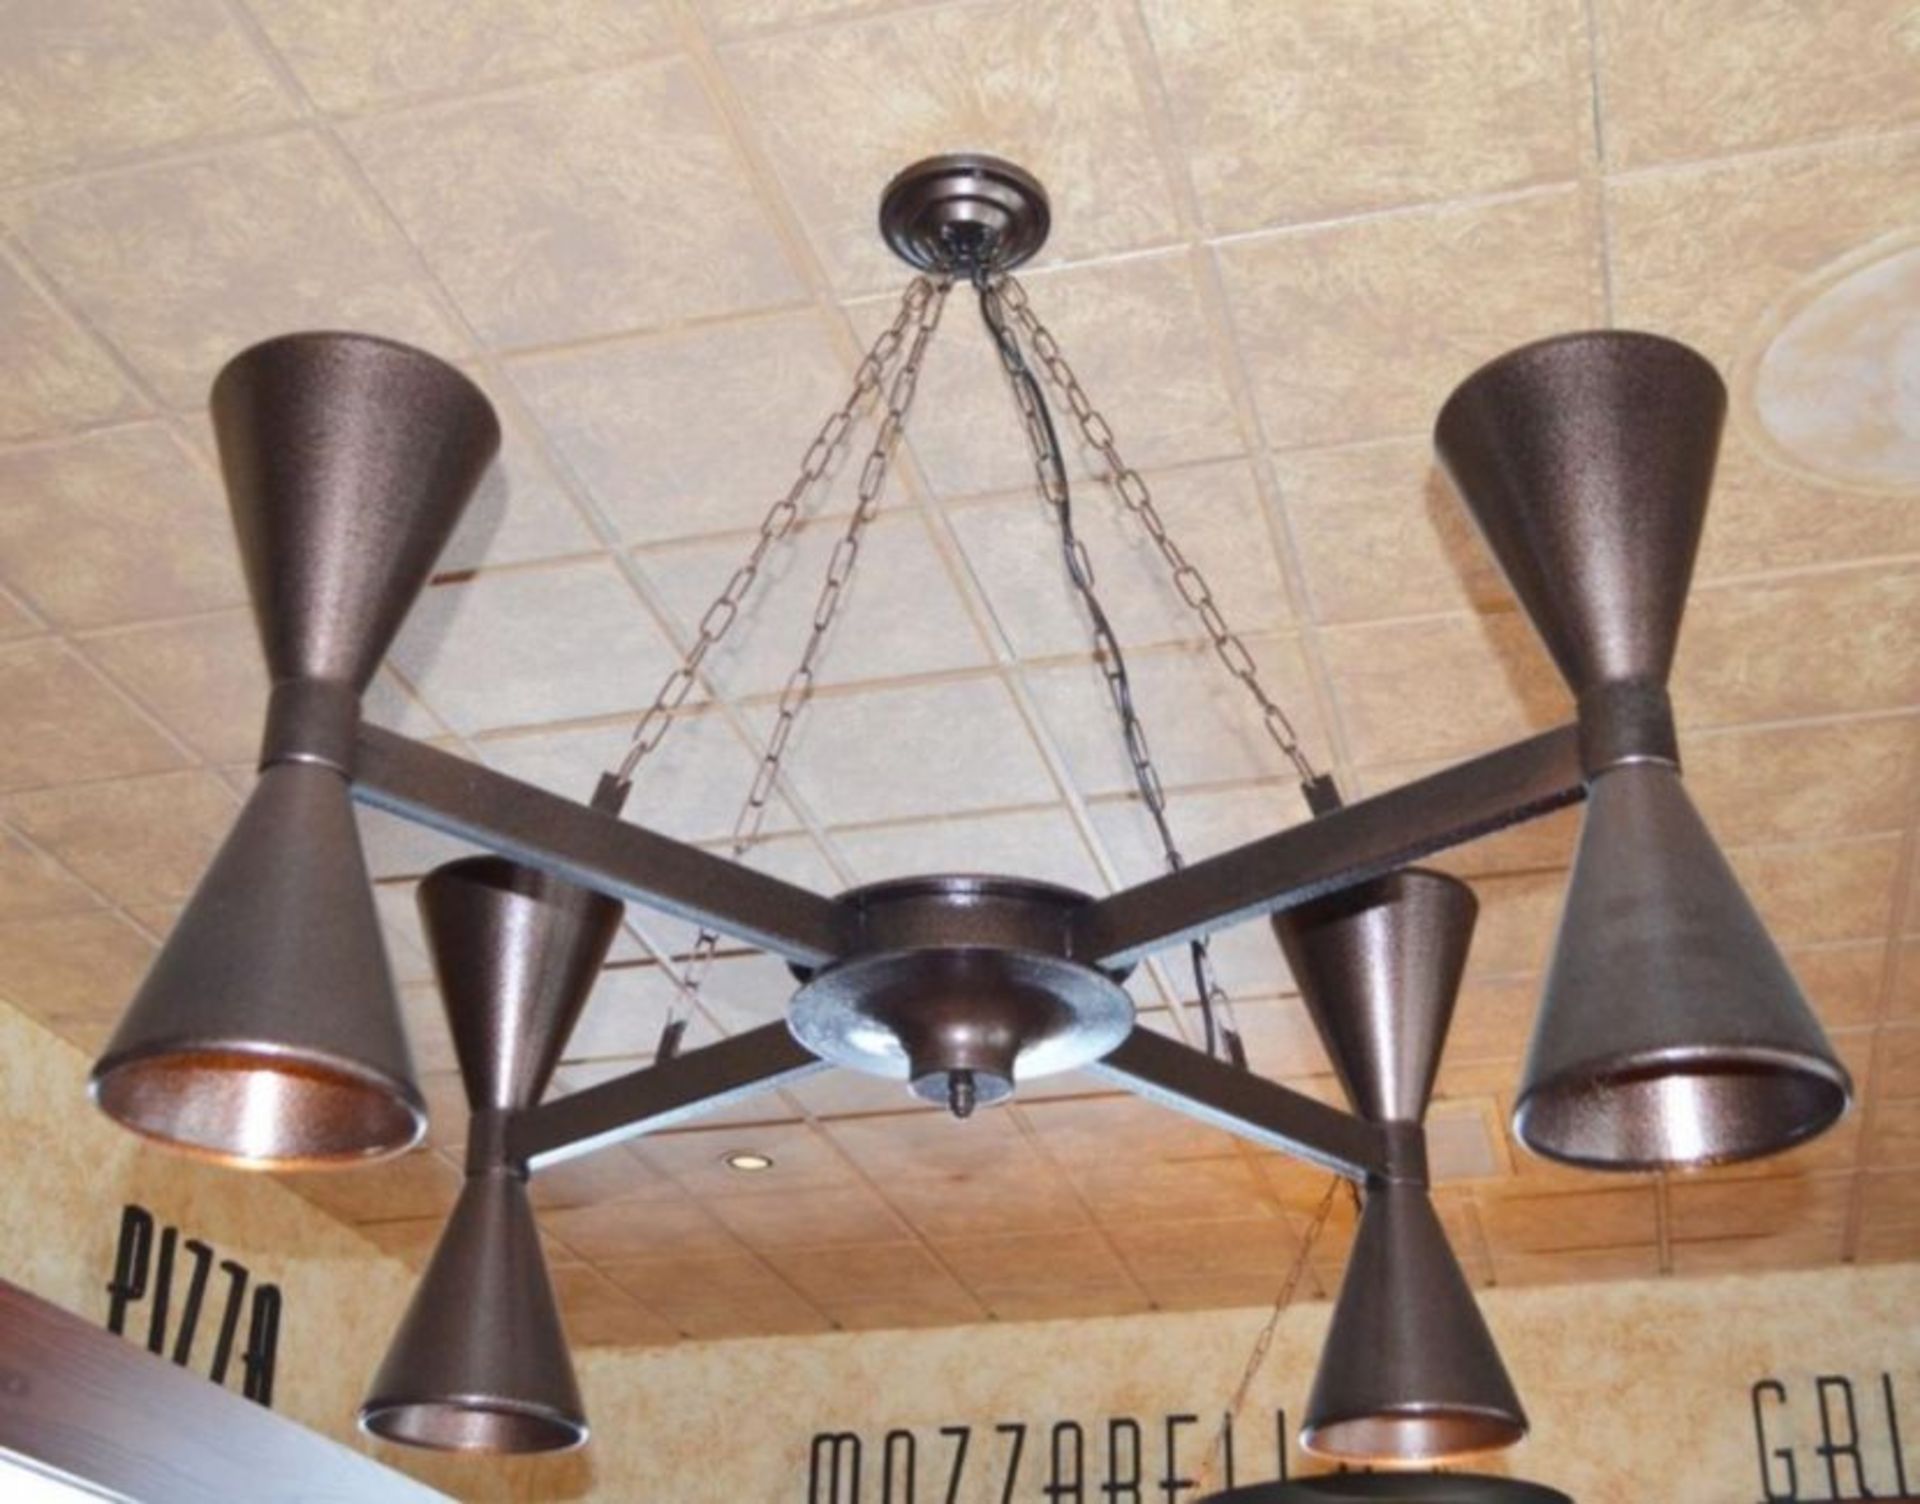 2 x Impressive 4 Arm Chandelier Light Fittings With Brown Pitted Finish - Image 4 of 4